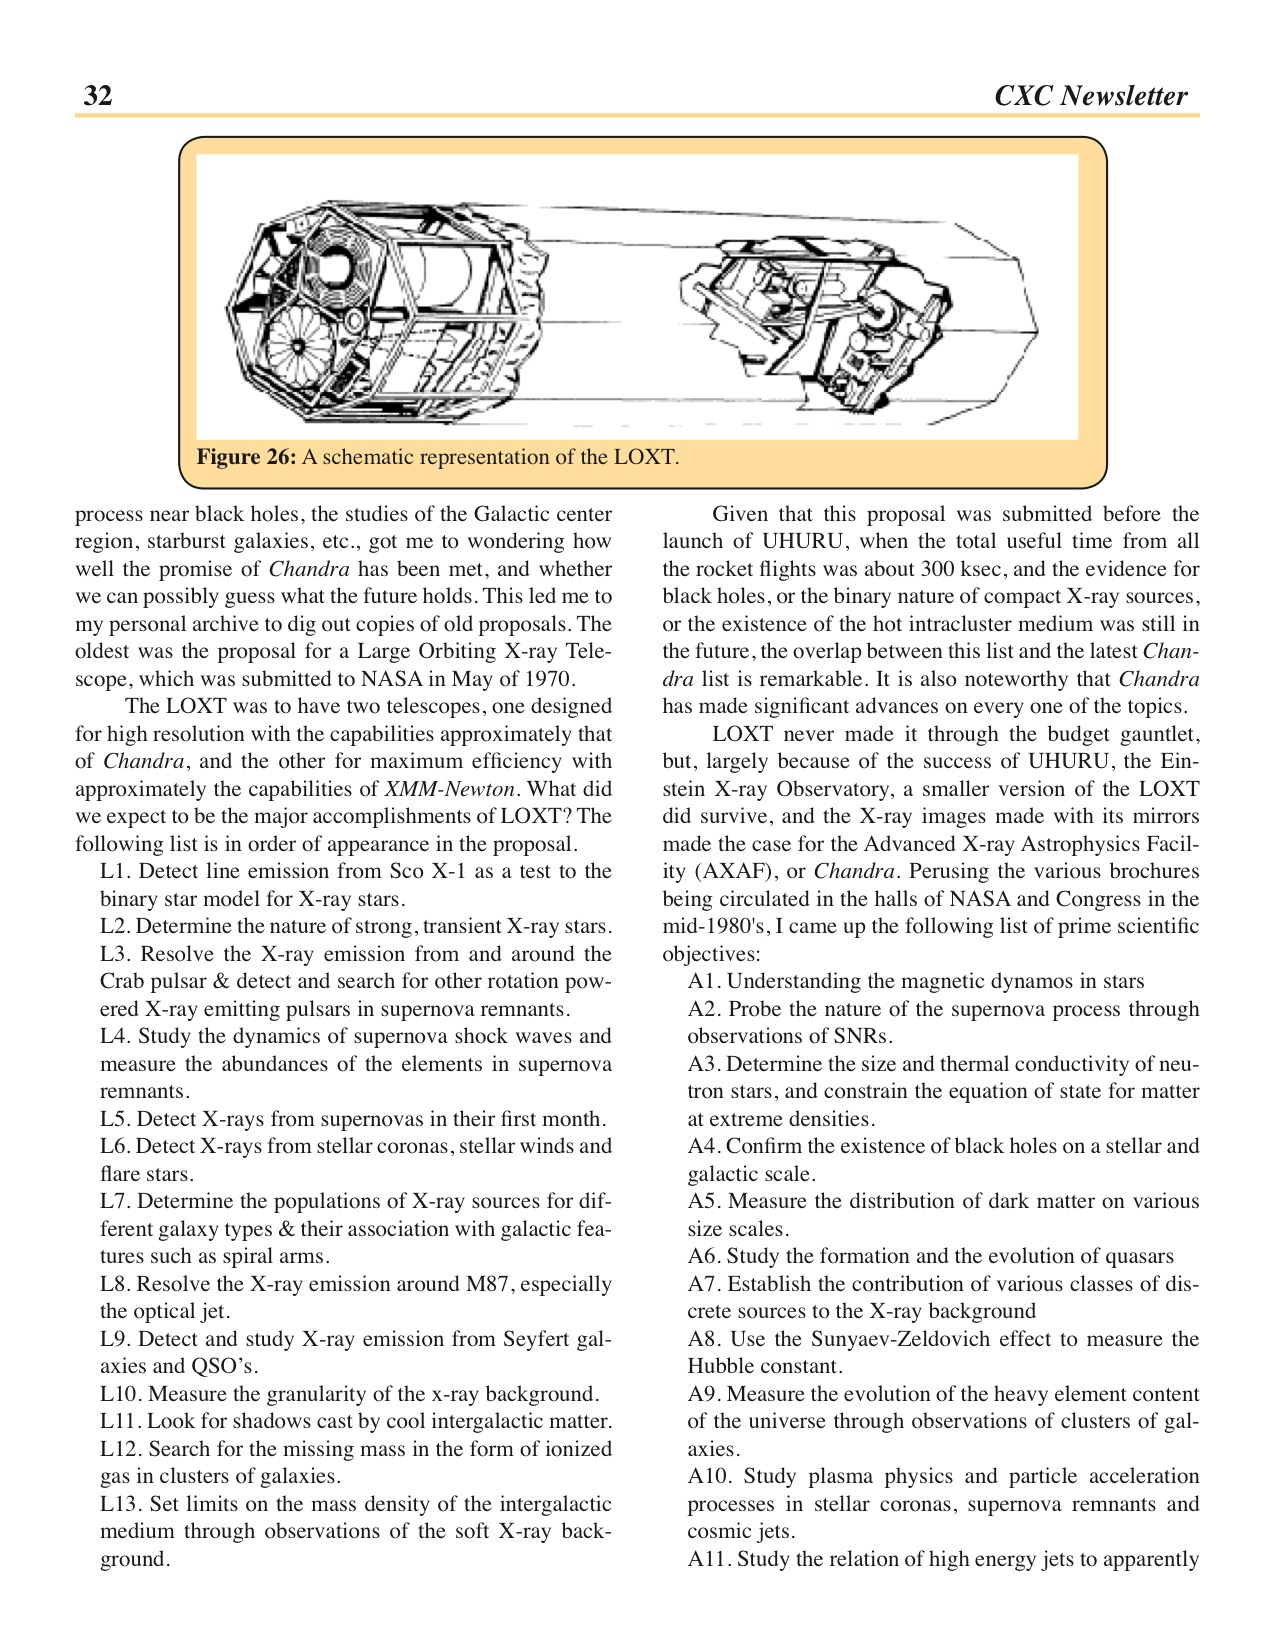 Page 32 of the Chandra Newsletter, issue 18.